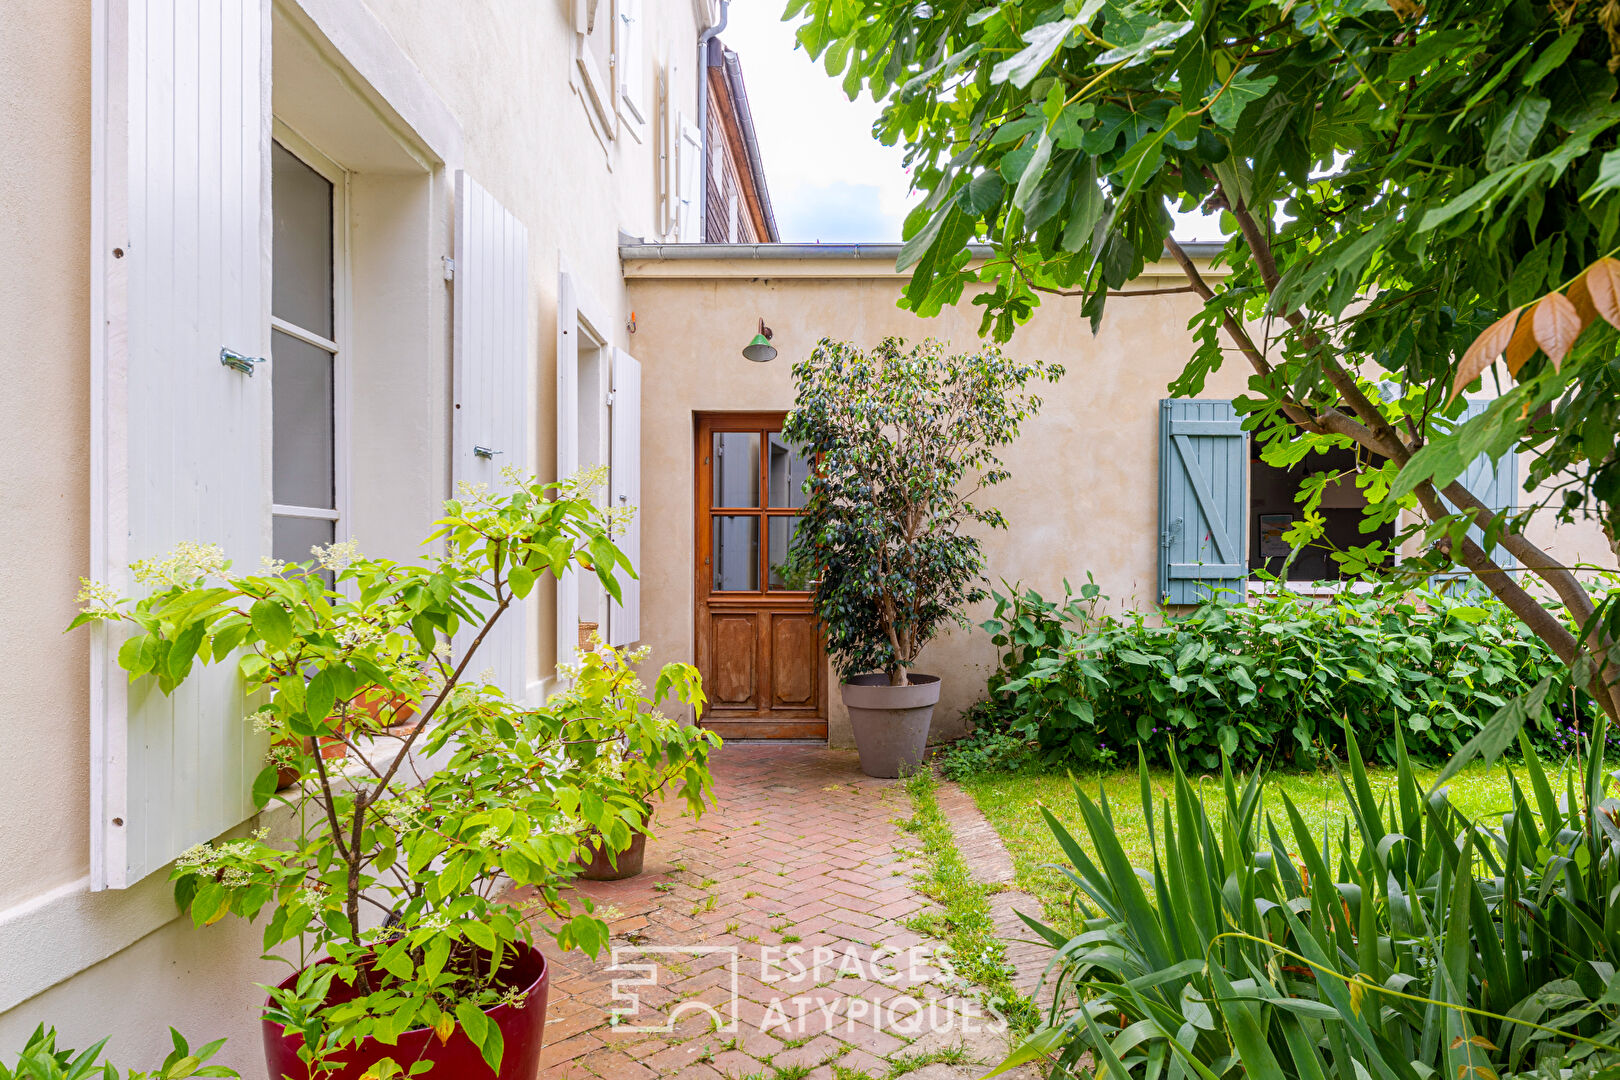 Warm family home in the heart of the village of Livilliers